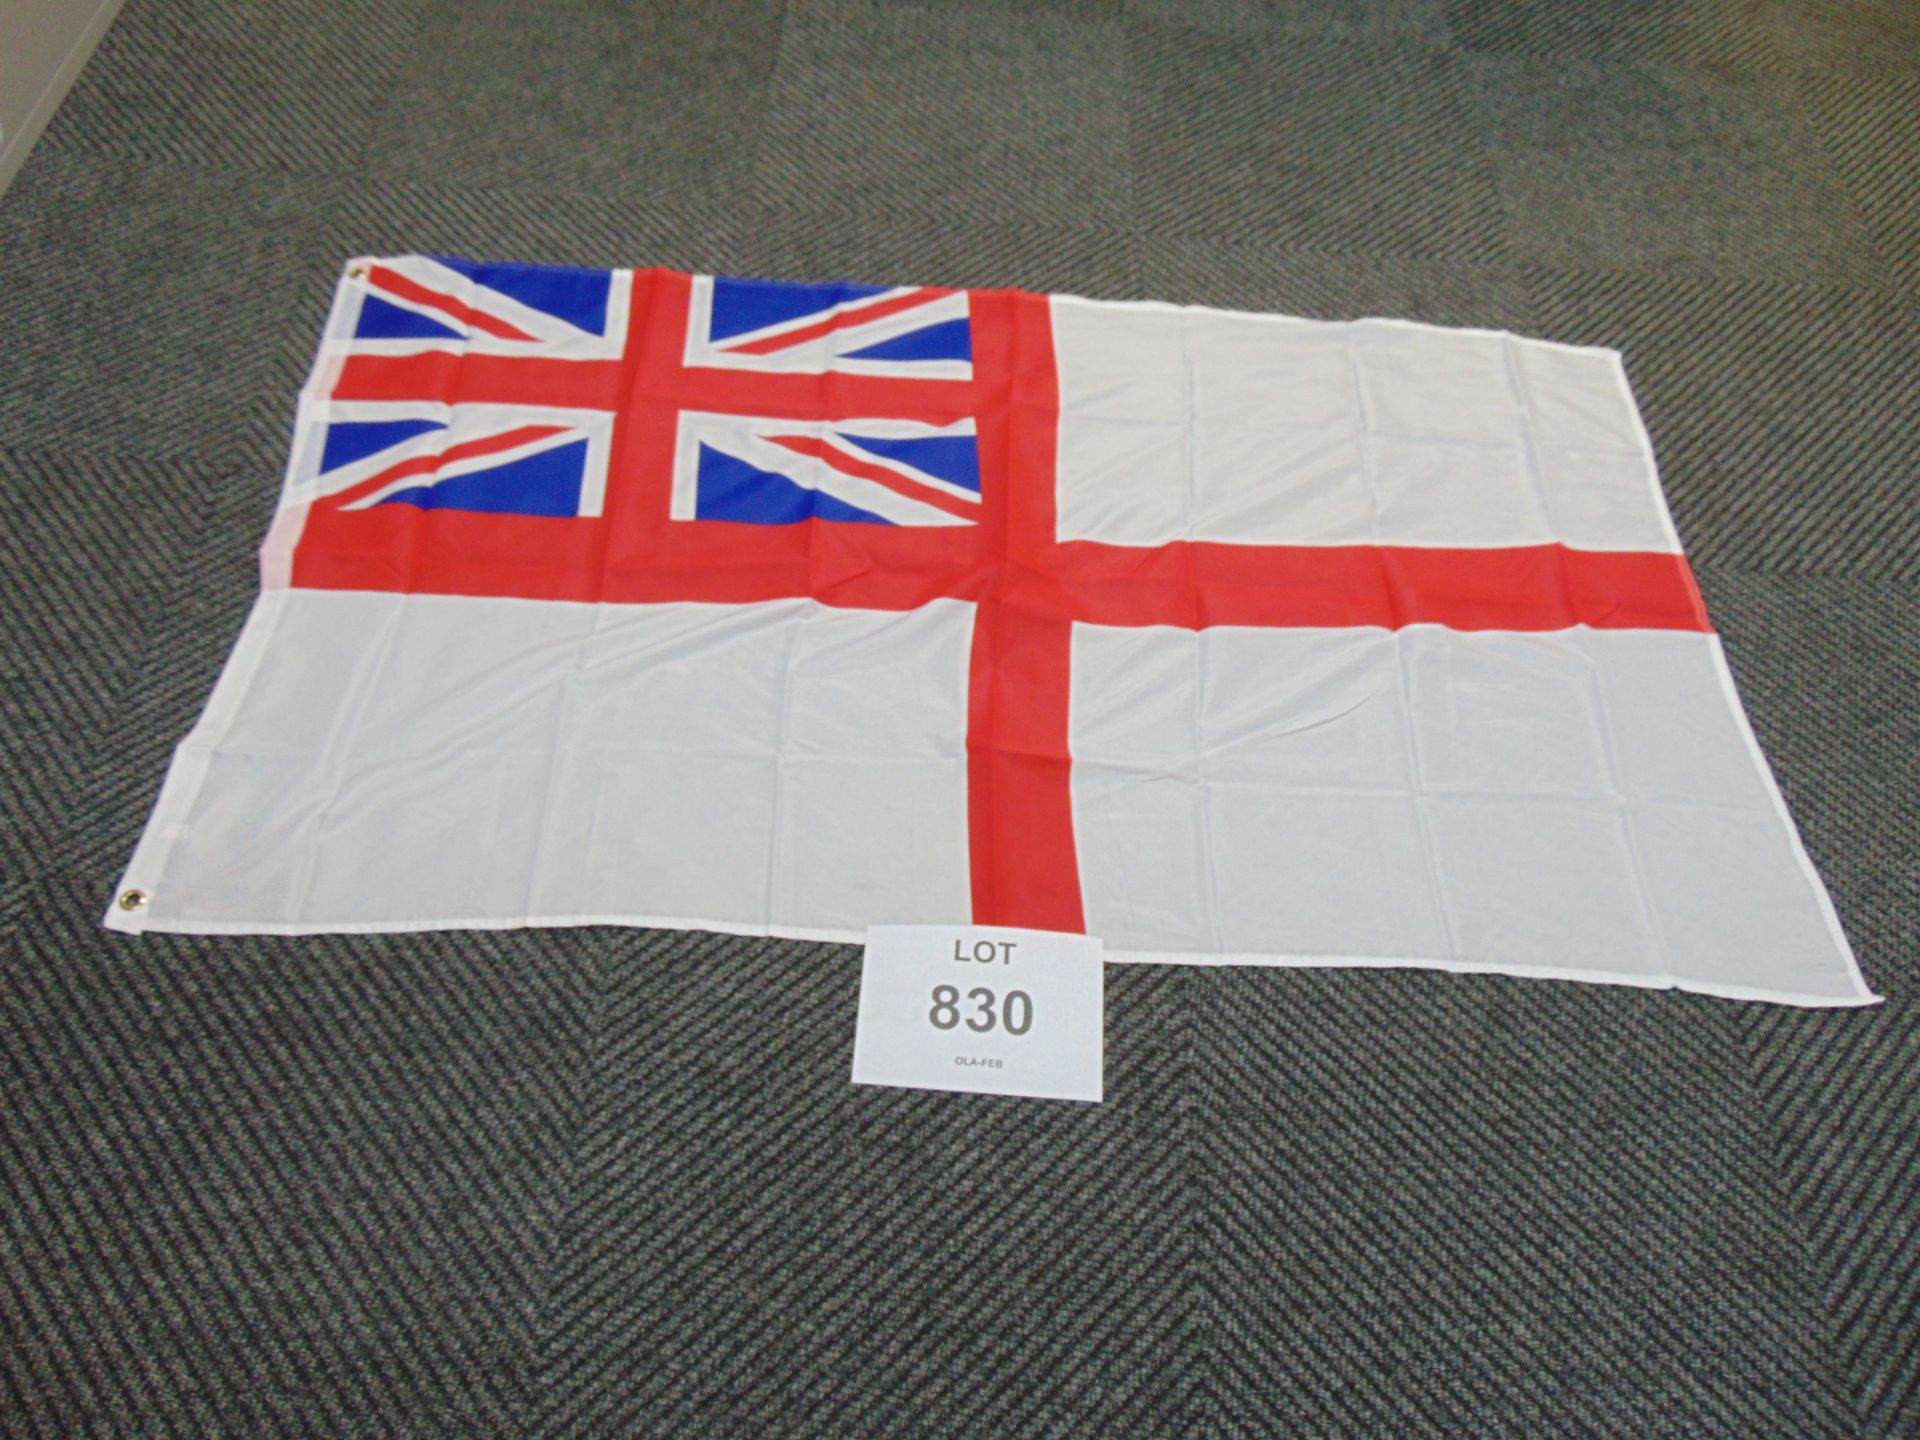 White Ensign Flag - 5ft x 3ft with Metal Eyelets.